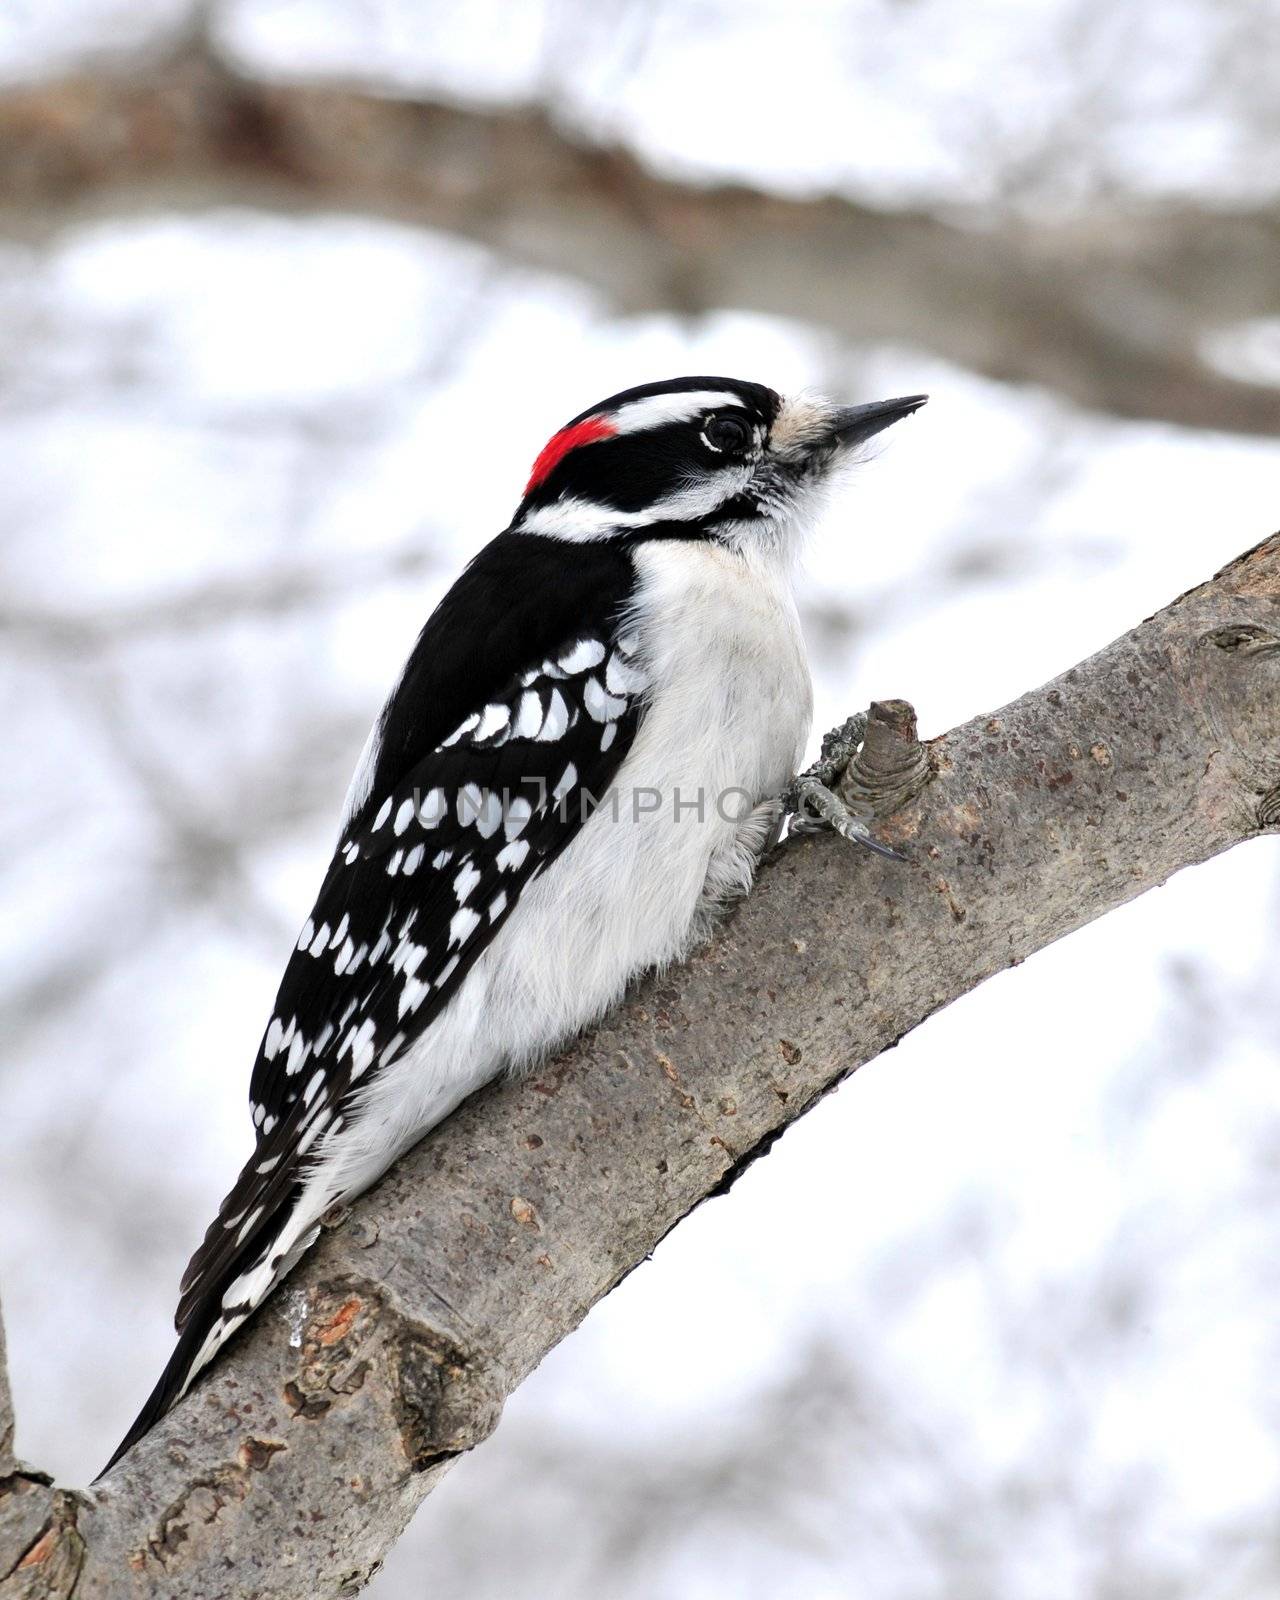 A male downy woodpecker perched on a tree branch.